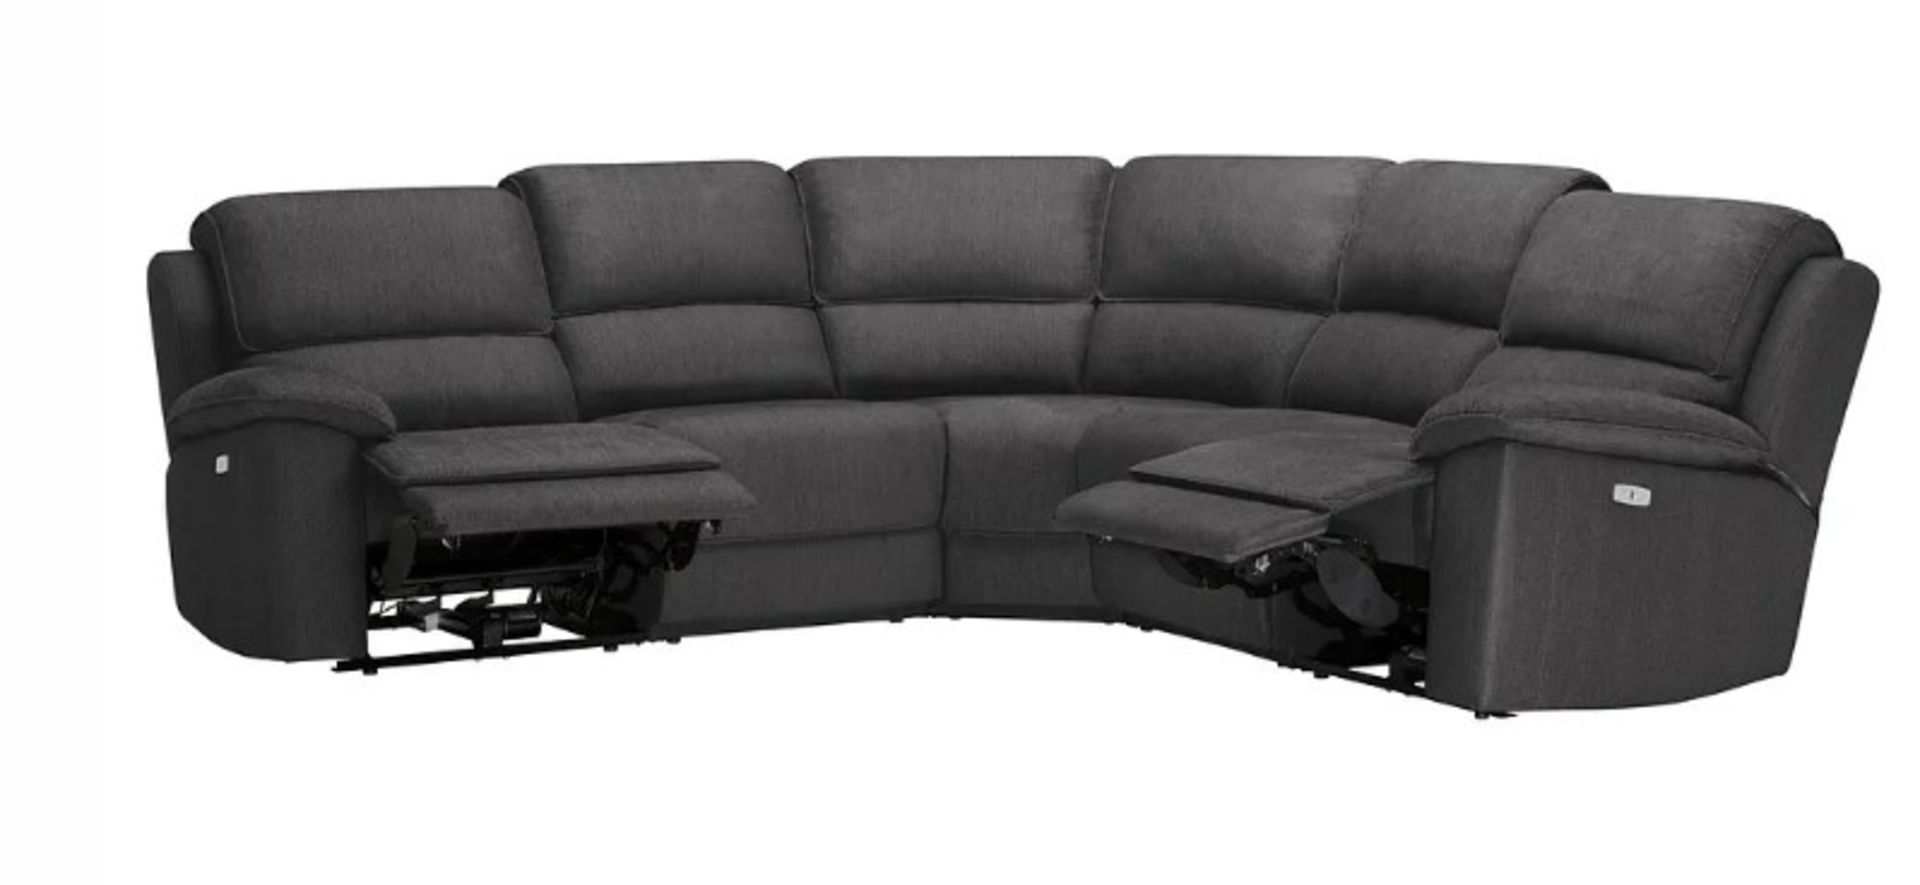 GOODWOOD 6 Seat Corner Recliner Sofa | Plush Charcoal Fabric. RRP £2,549. (ROW7-6BOXES) The Goodwood - Image 5 of 9